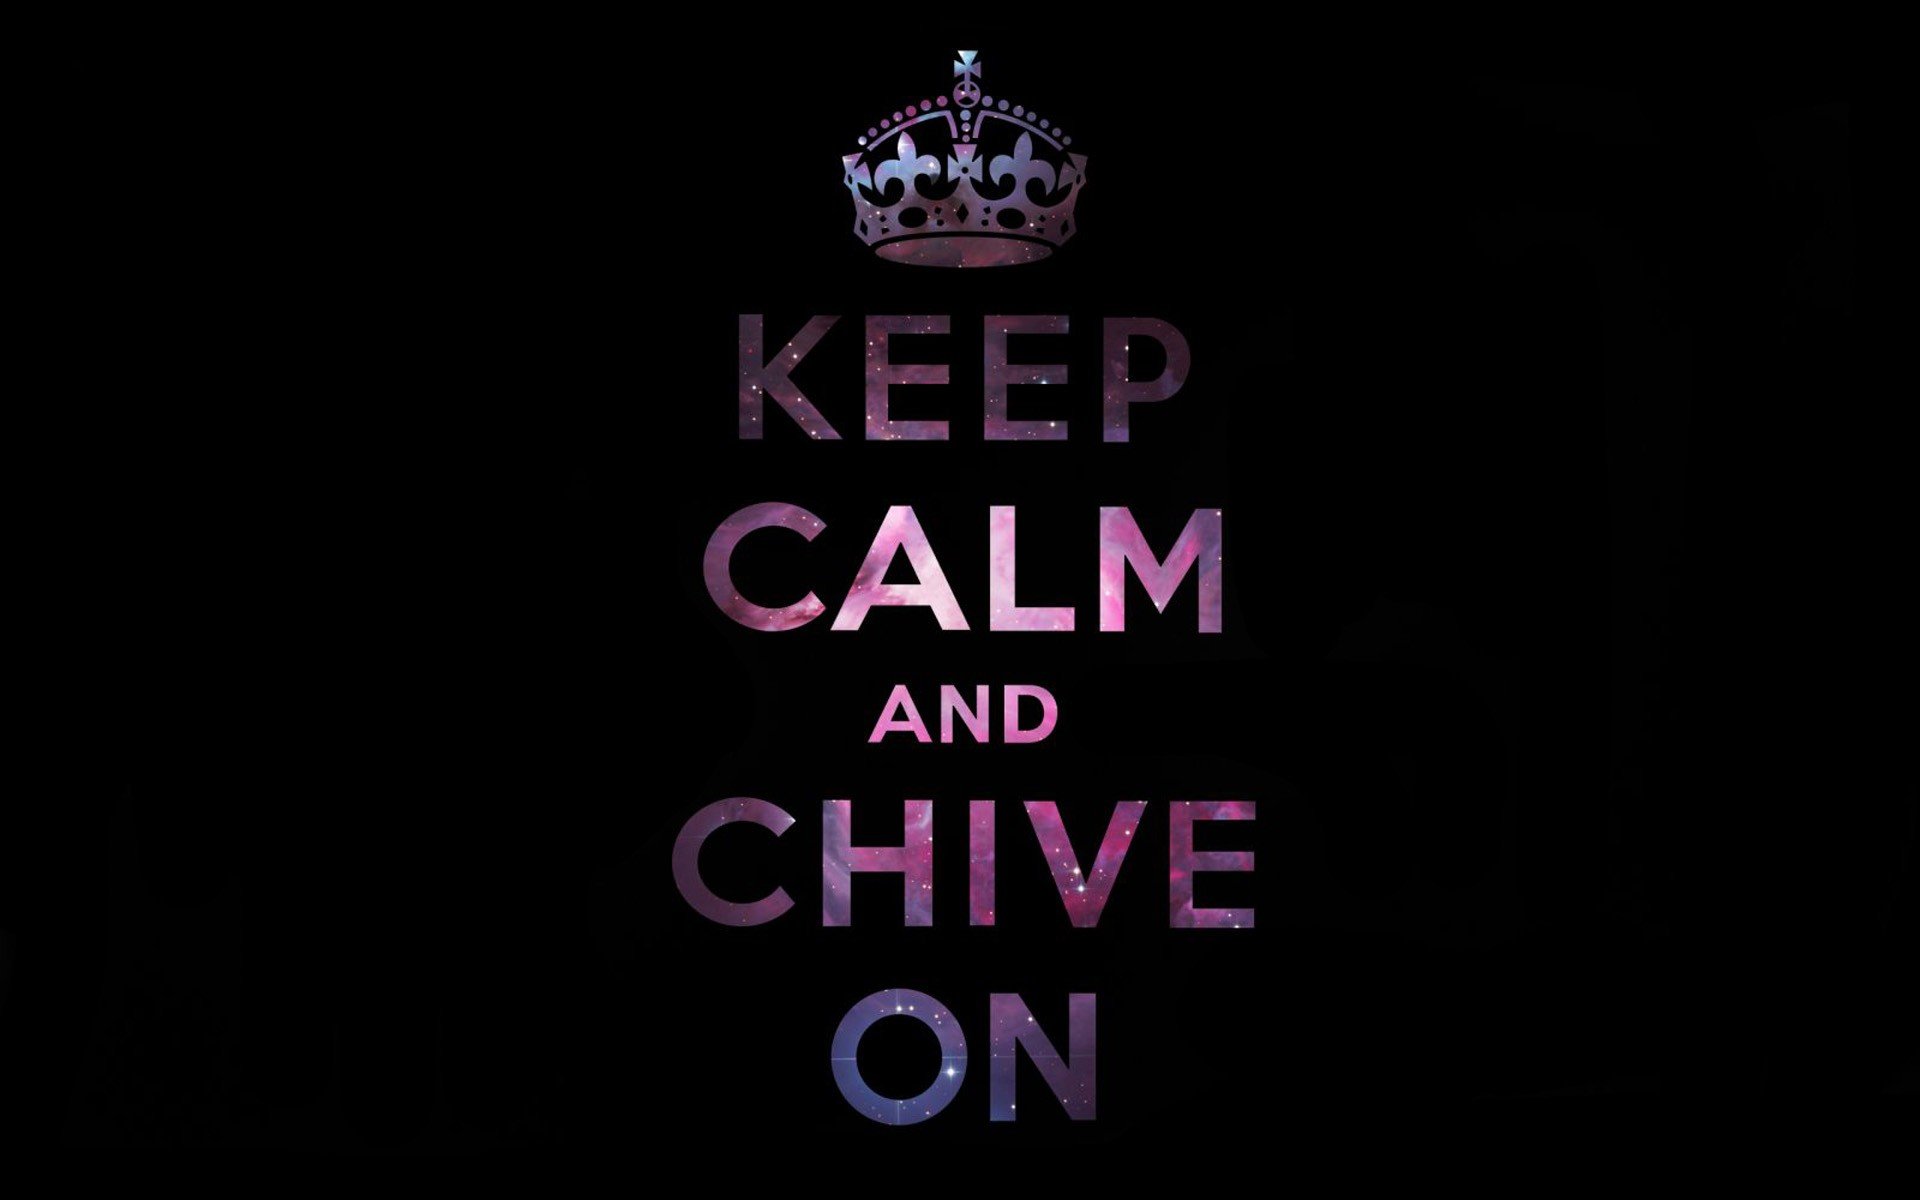 keep, Calm, And, Black, Background, Kcco, The, Chive, Chiveon Wallpaper